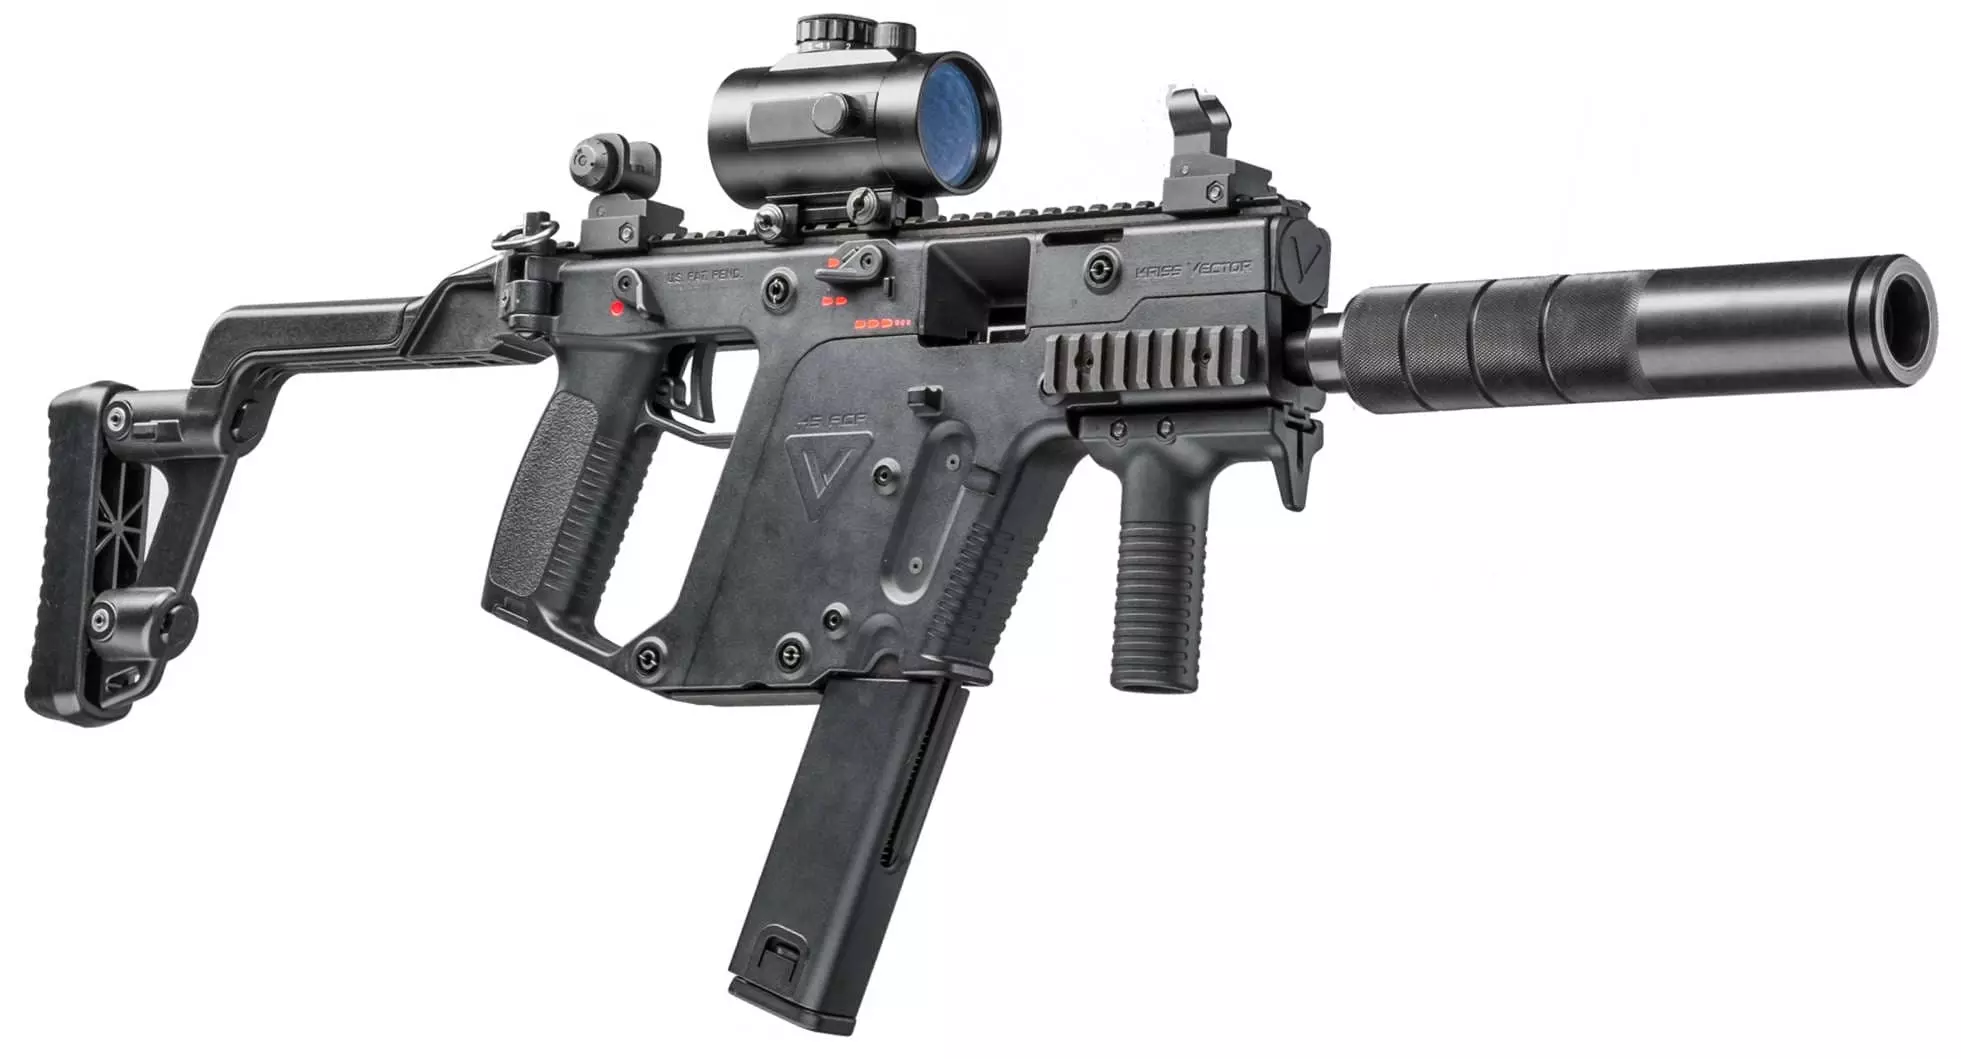 Kriss Vector laser tag SMG red-dot sight